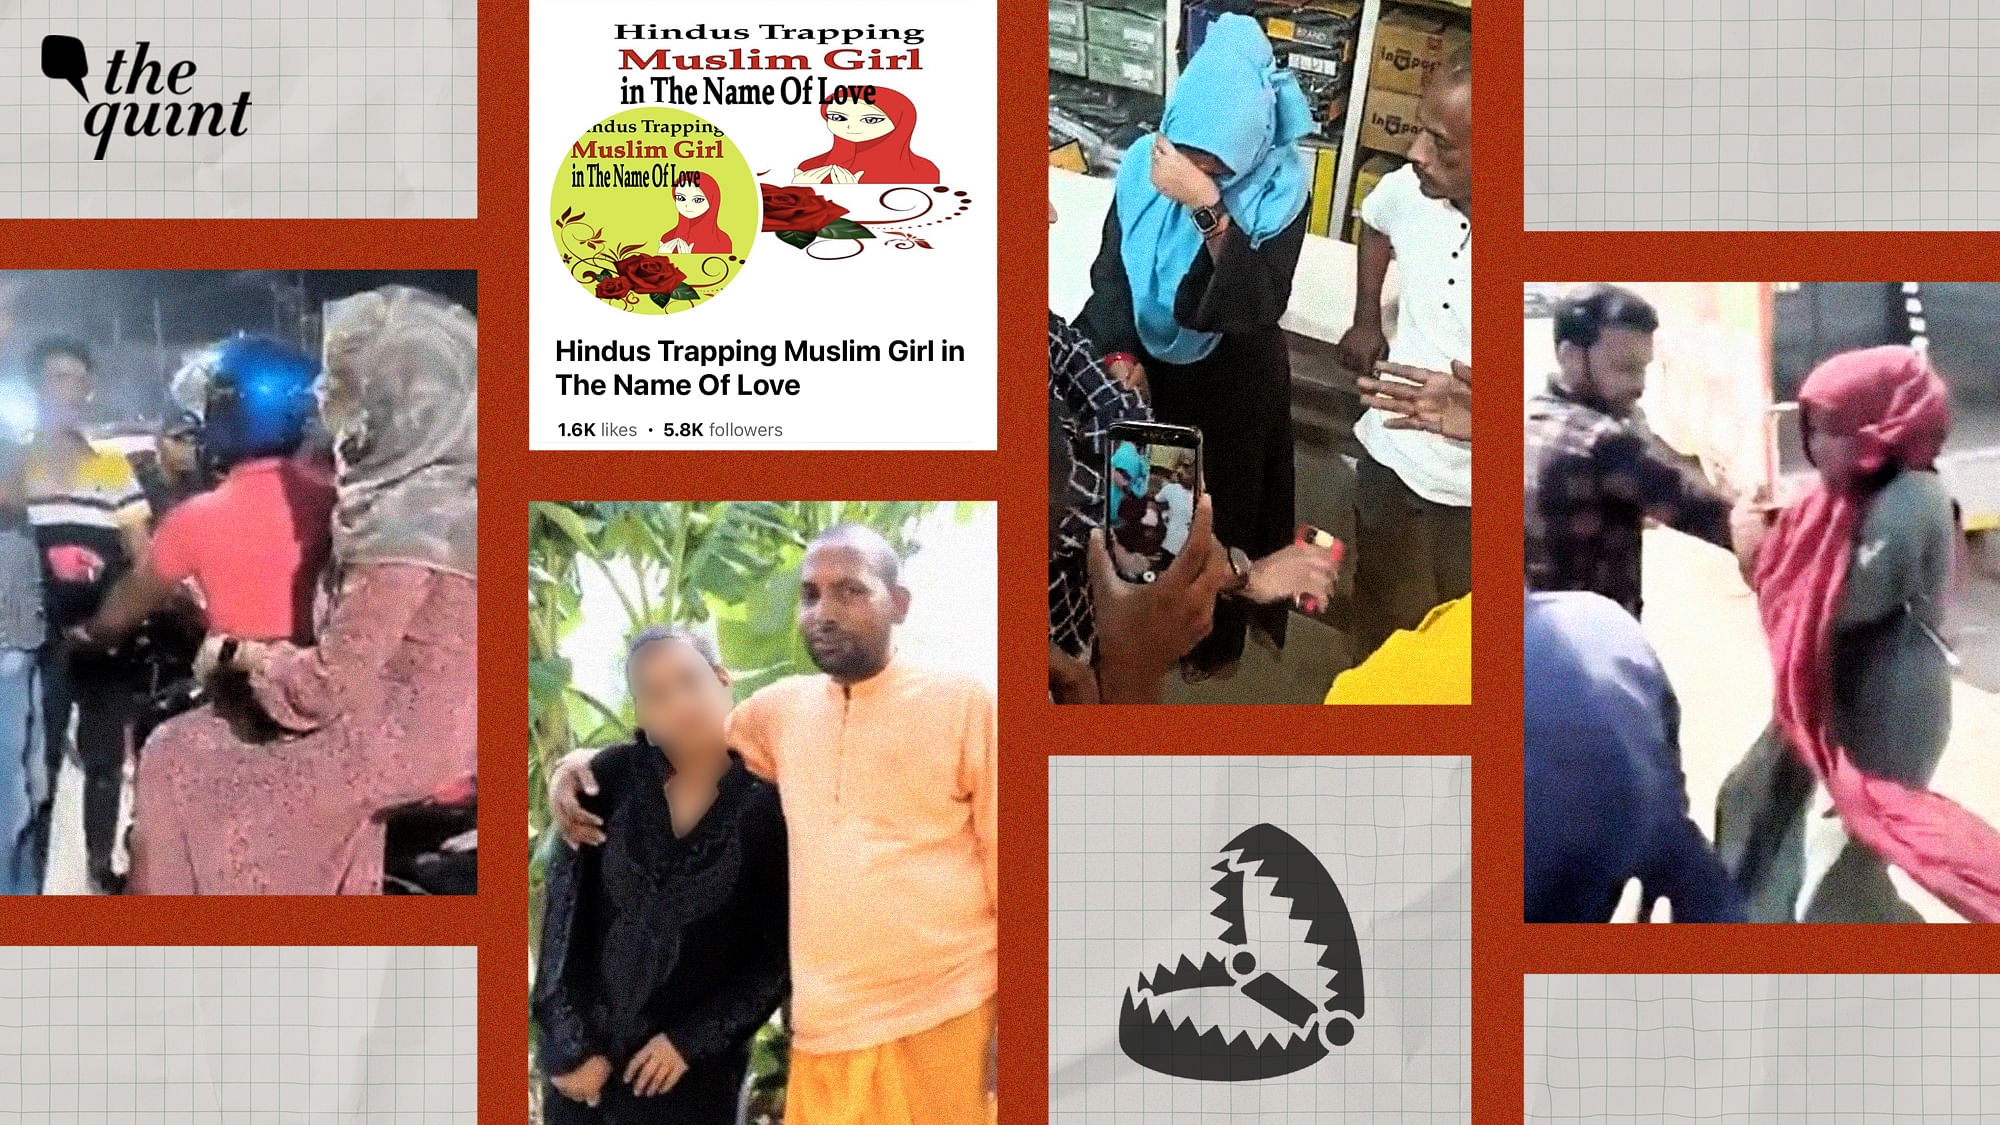 Muslim Women Seen with Hindu Men Harassed, Doxed — All In the Name of Bhagwa Love Trap picture